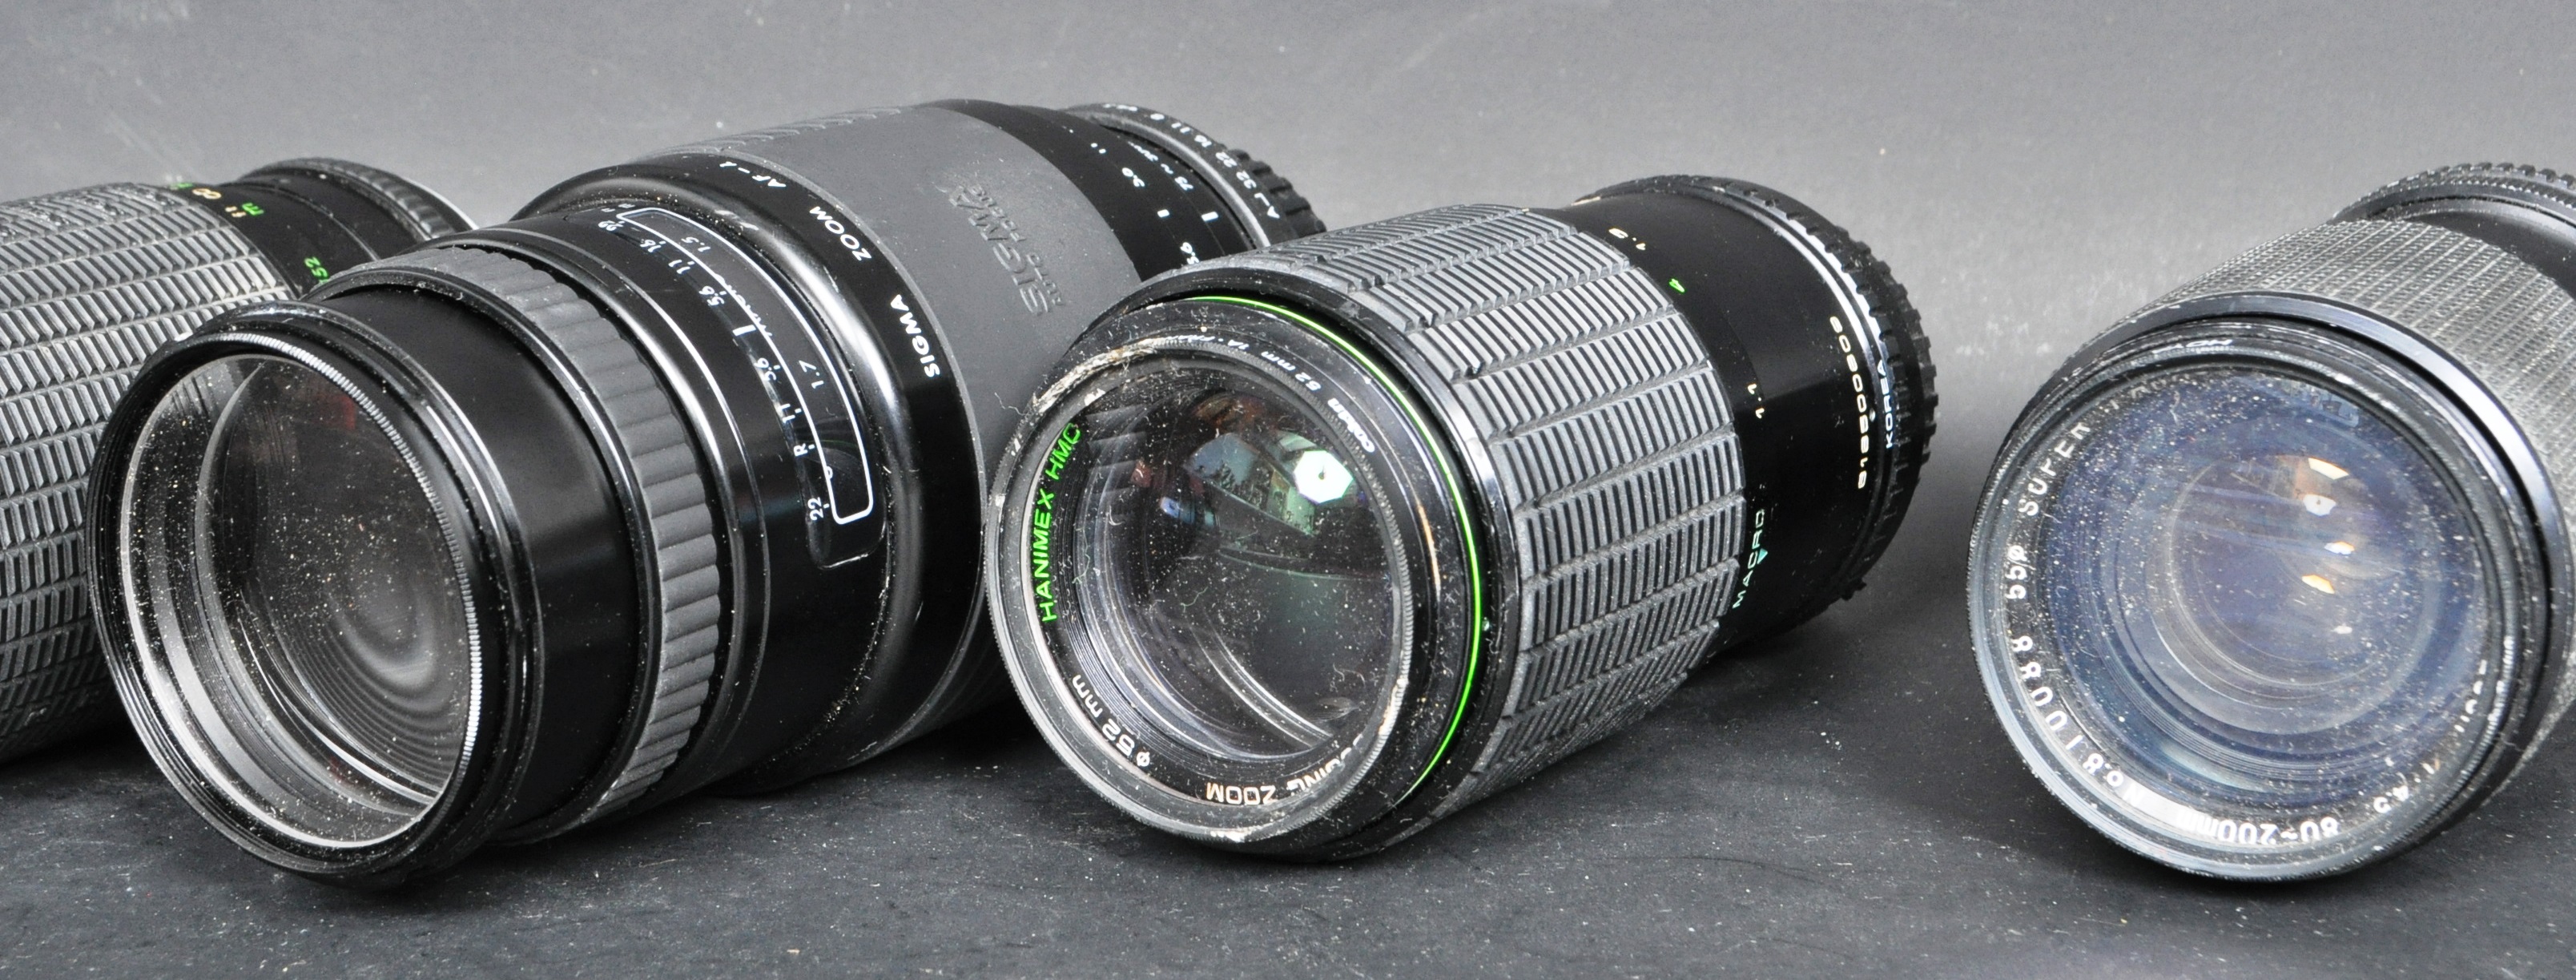 COLLECTION OF VINTAGE PHOTOGRAPHIC CAMERA LENSES - Image 4 of 5